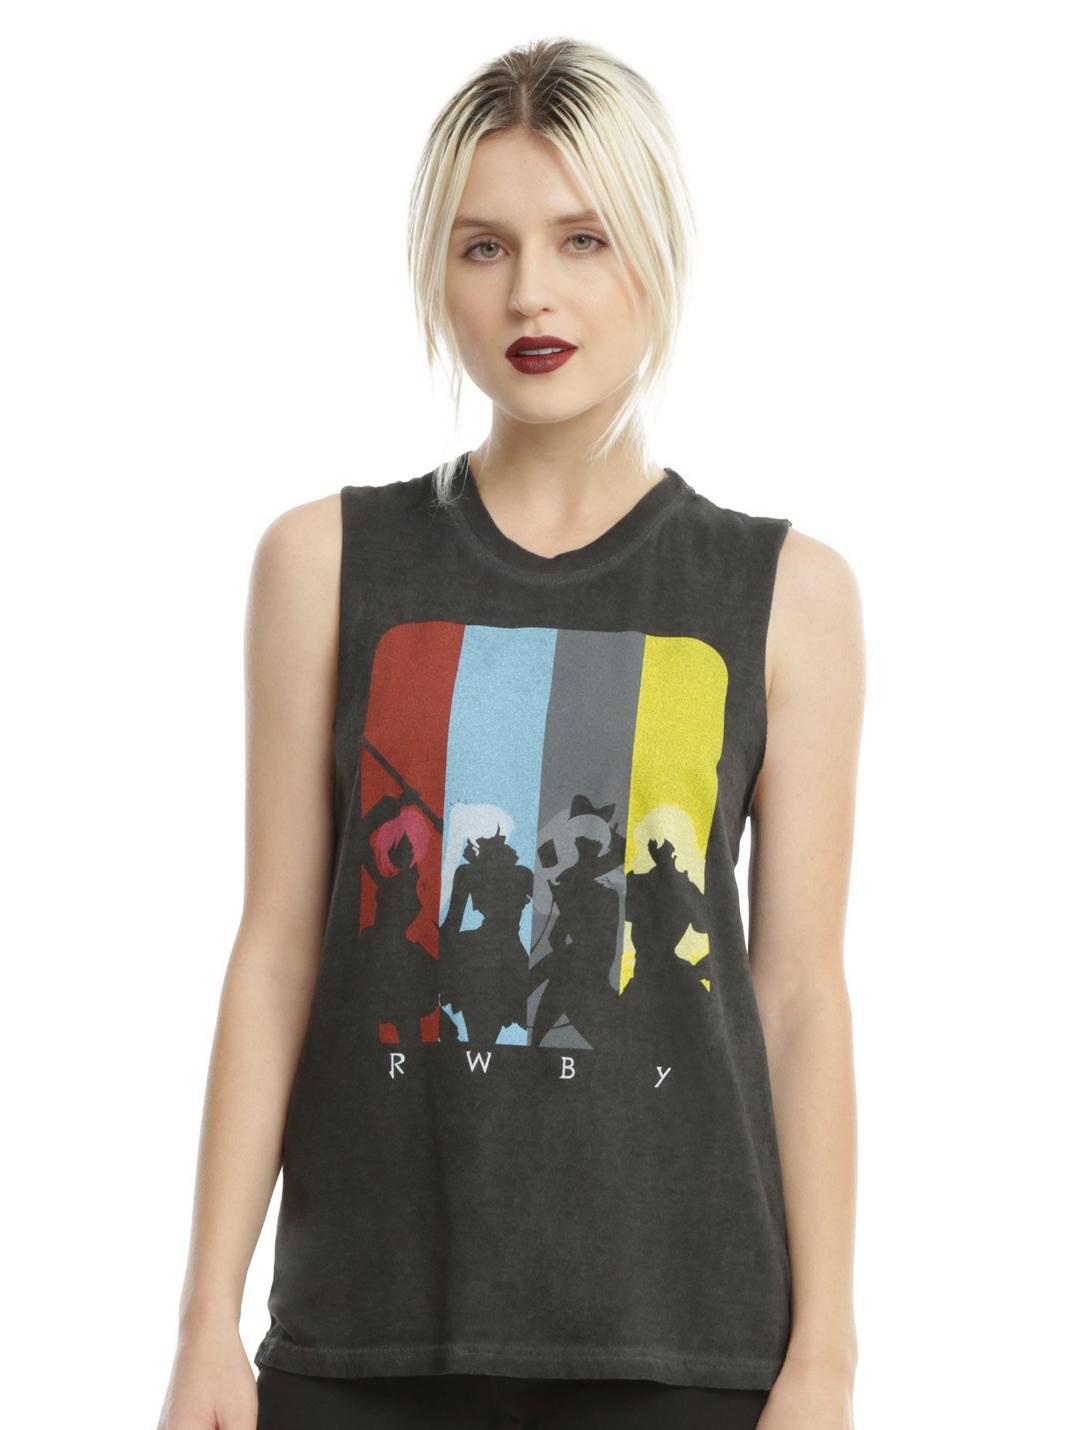 RWBY Panel Silhouette Girls Muscle Top, GREY, hi-res